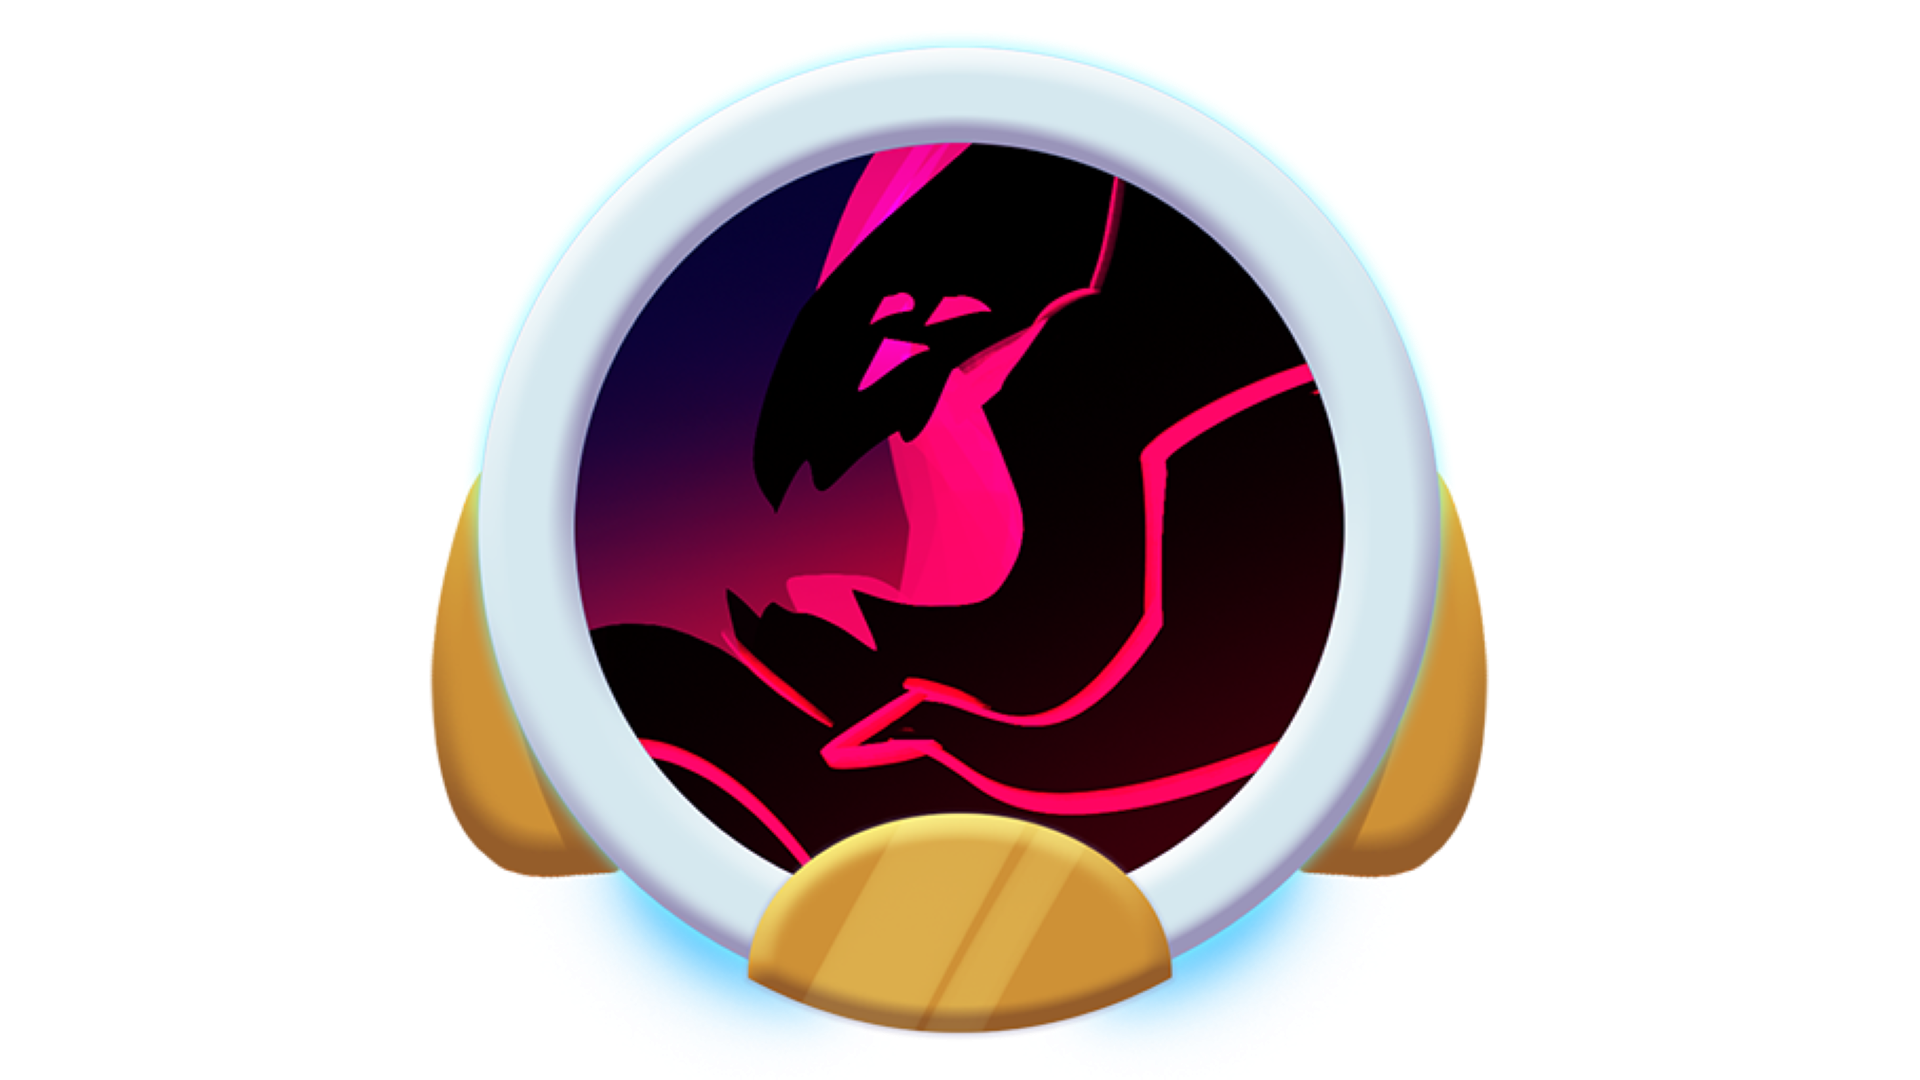 Icon for Guardians of Harmony